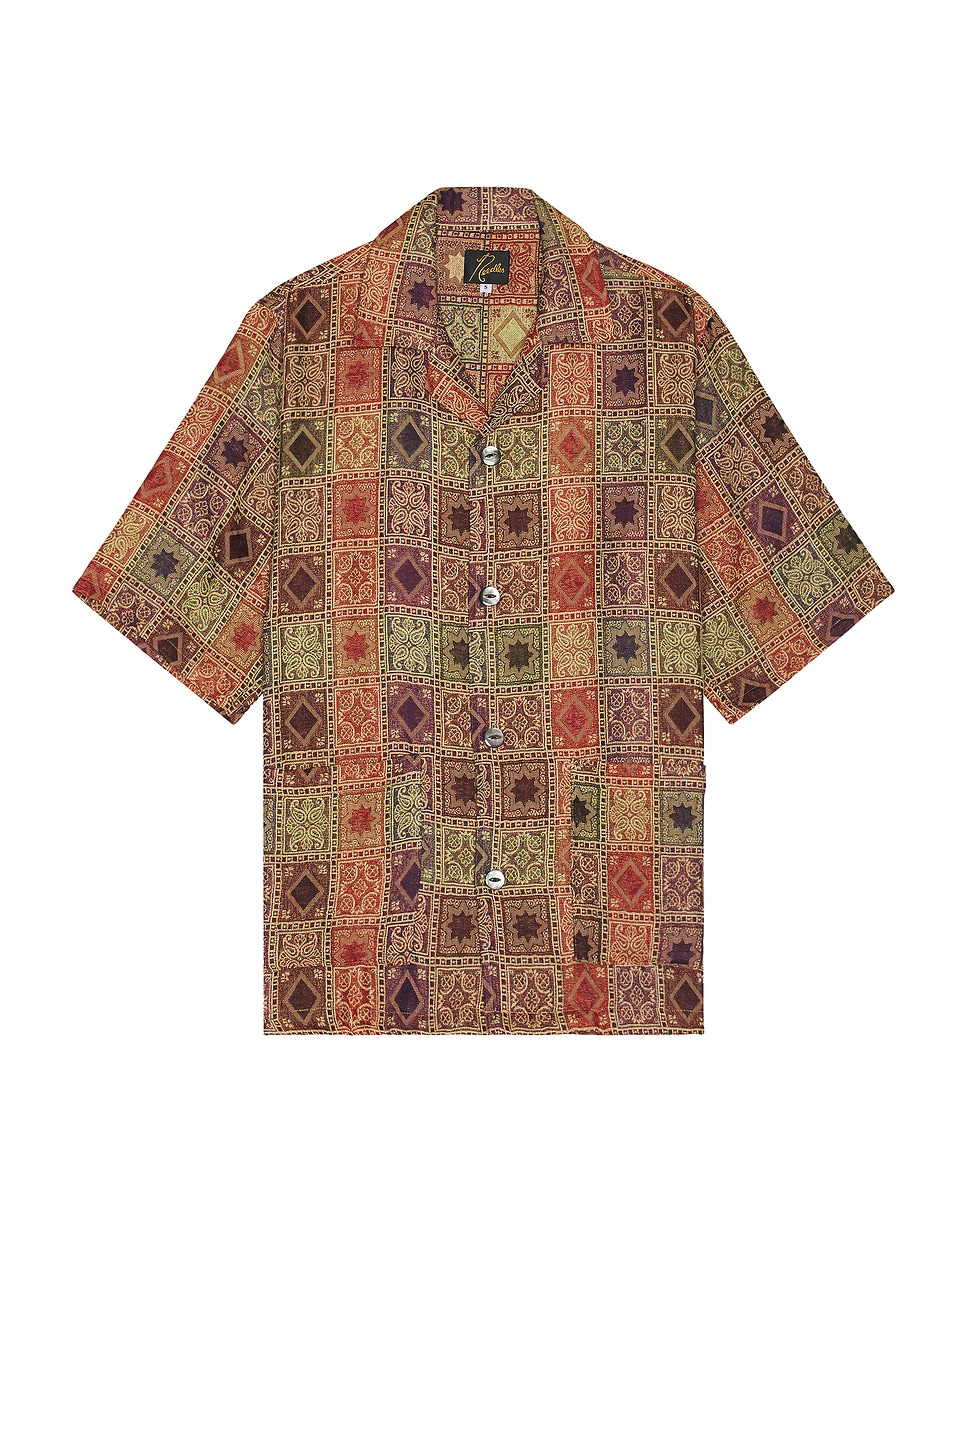 Image 1 of Needles Cabana Shirt Poly India In Rust, Navy, & Green in Rust, Navy & Green